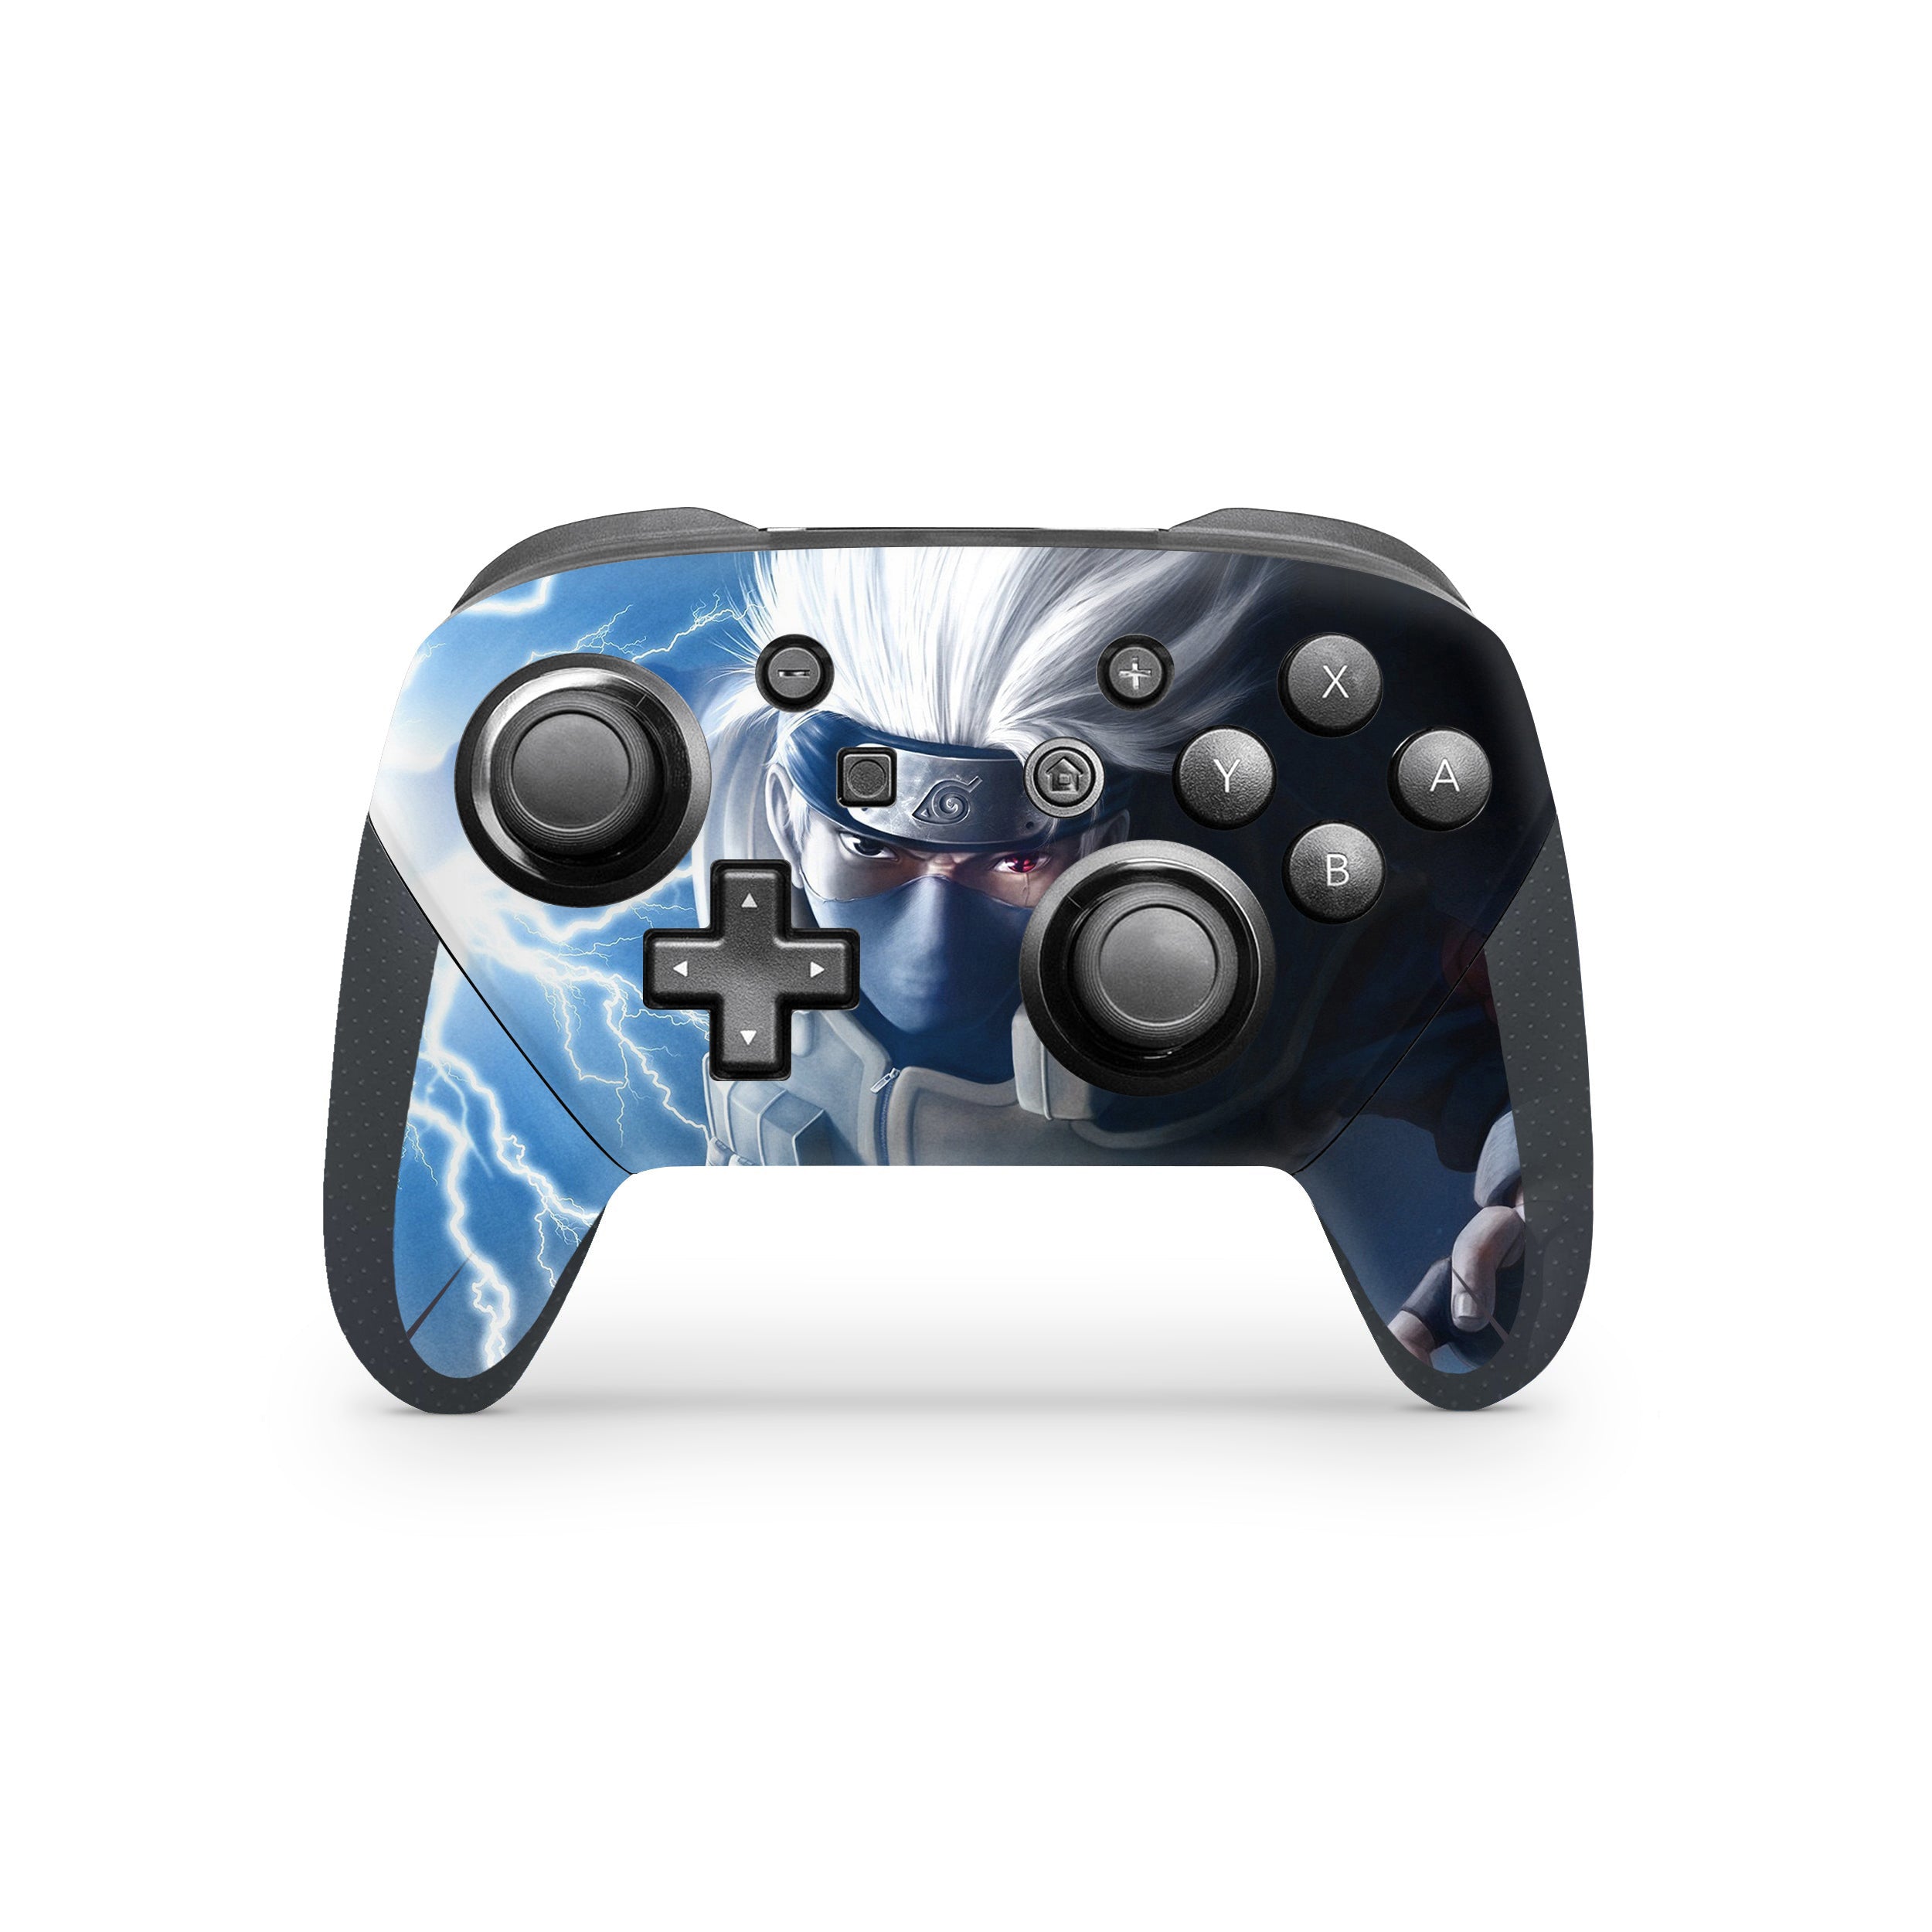 A video game skin featuring a Naruto Kakashi design for the Switch Pro Controller.